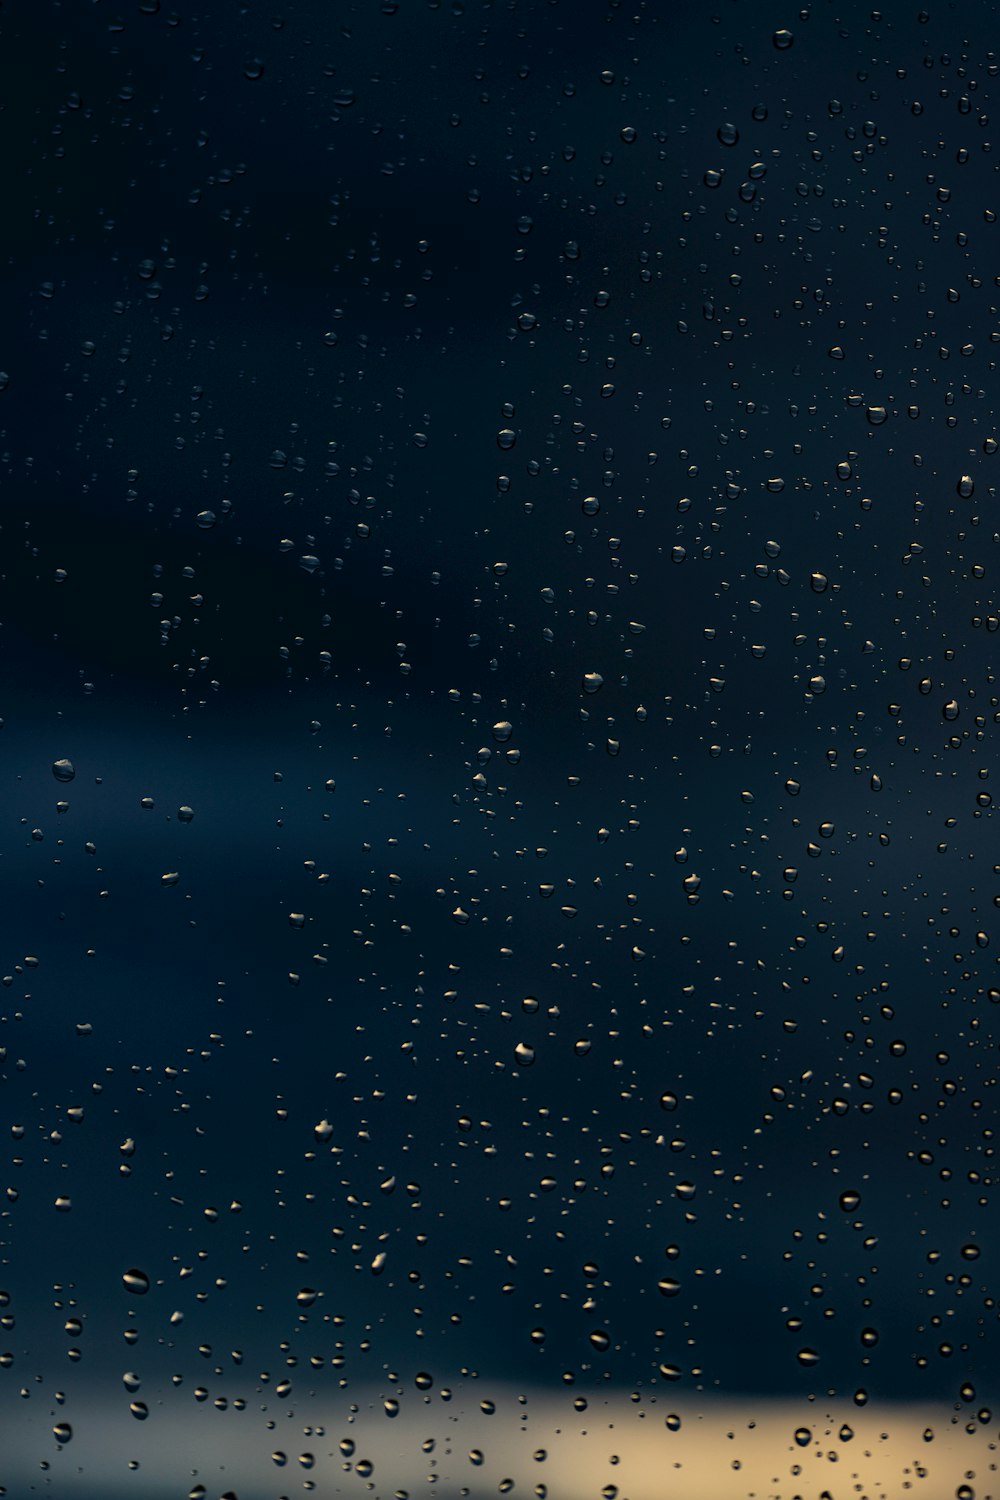 rain drops on a window with a dark sky in the background